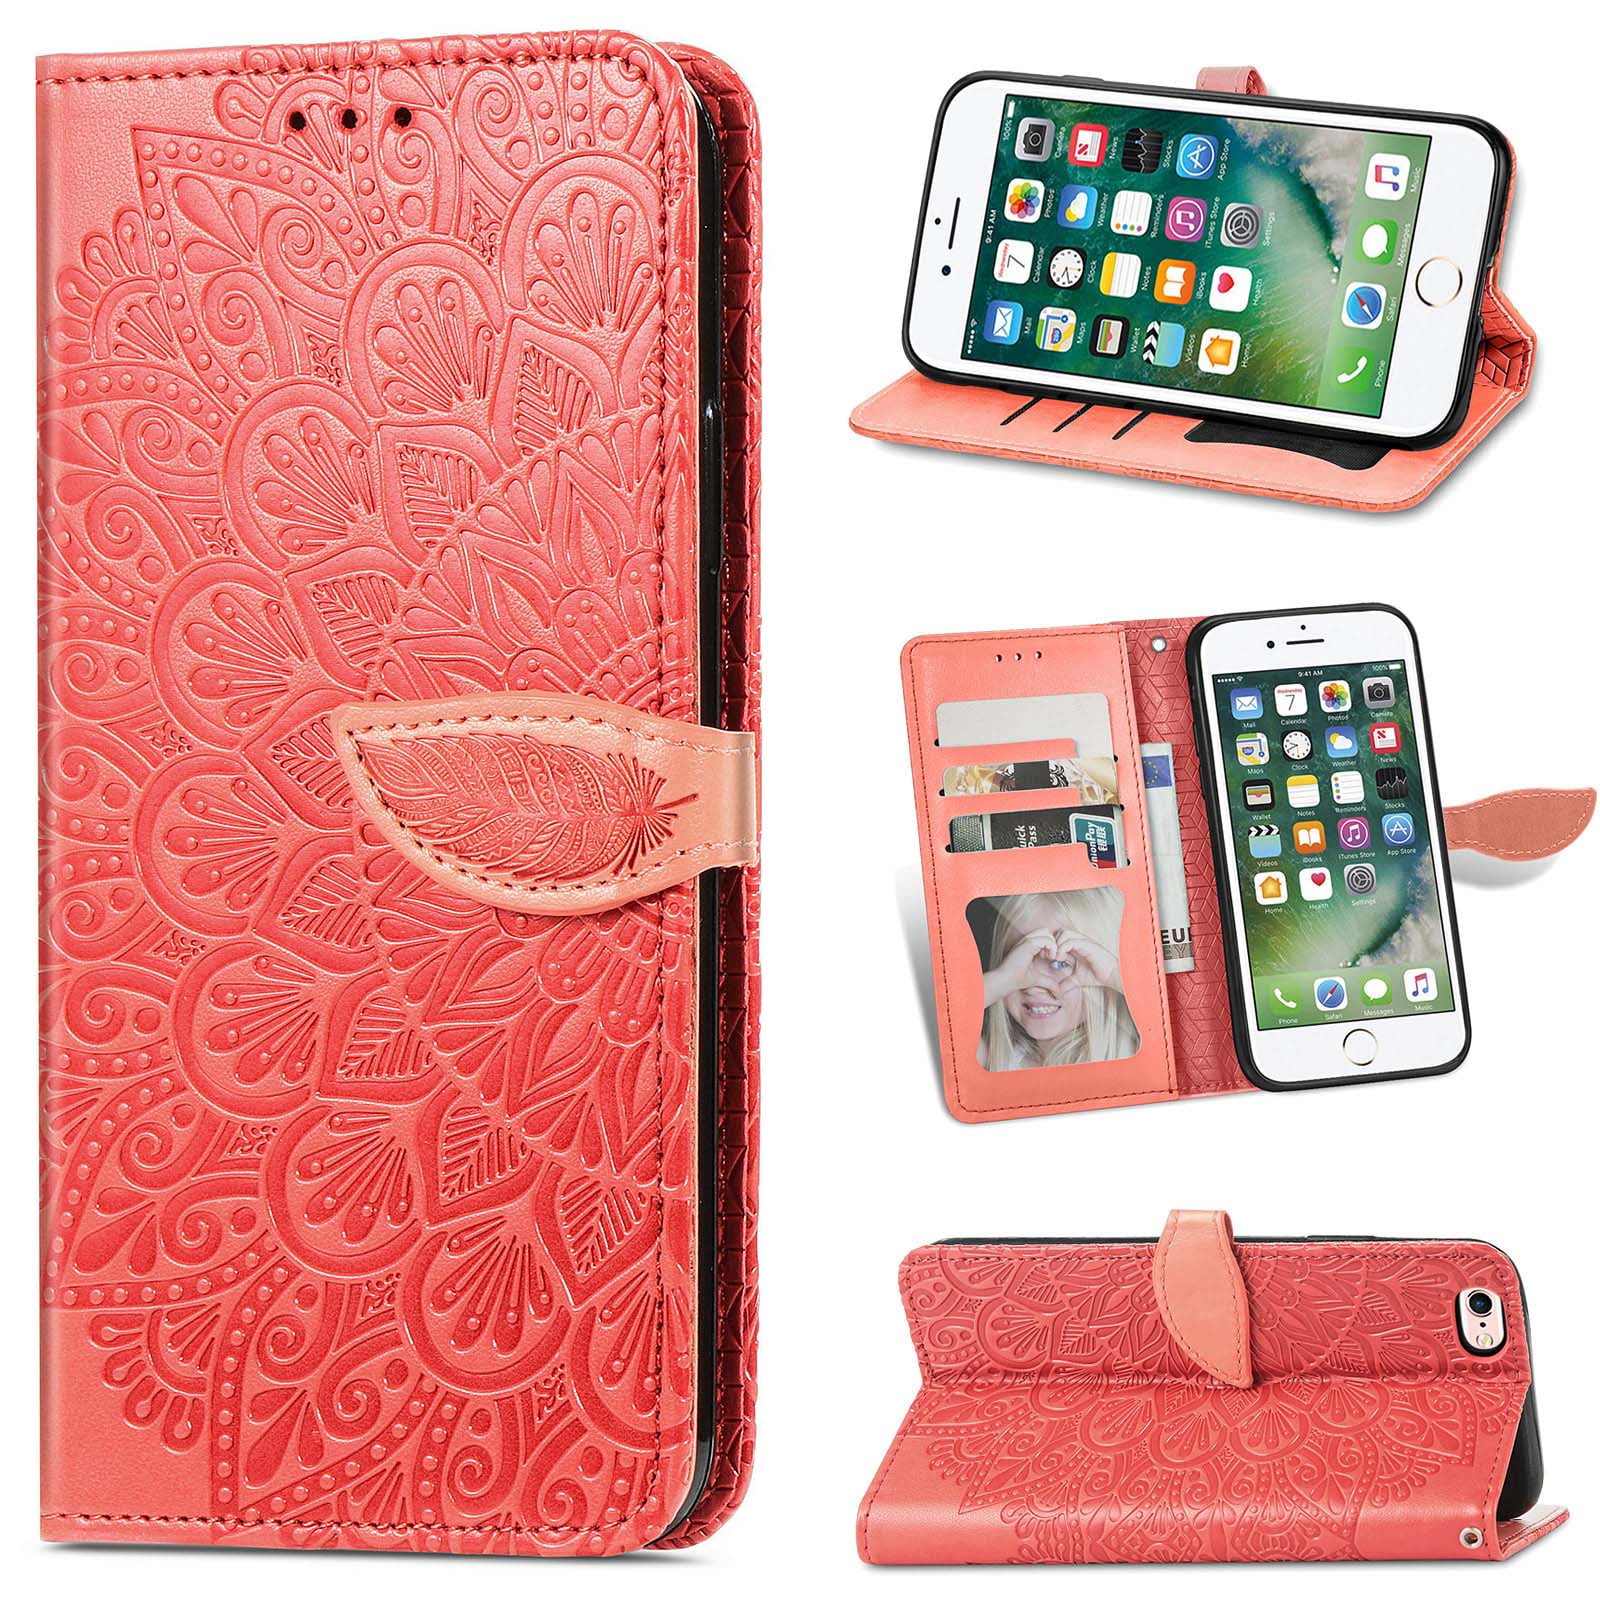 Allytech Case for iPhone 6 Plus/iPhone 6S Plus, Premium PU Leather Embossed Floral Magnetic Wallet TPU Back Cover with Card Slots Wristlet Purse Case for iPhone 6 Plus/6S Plus 5.5